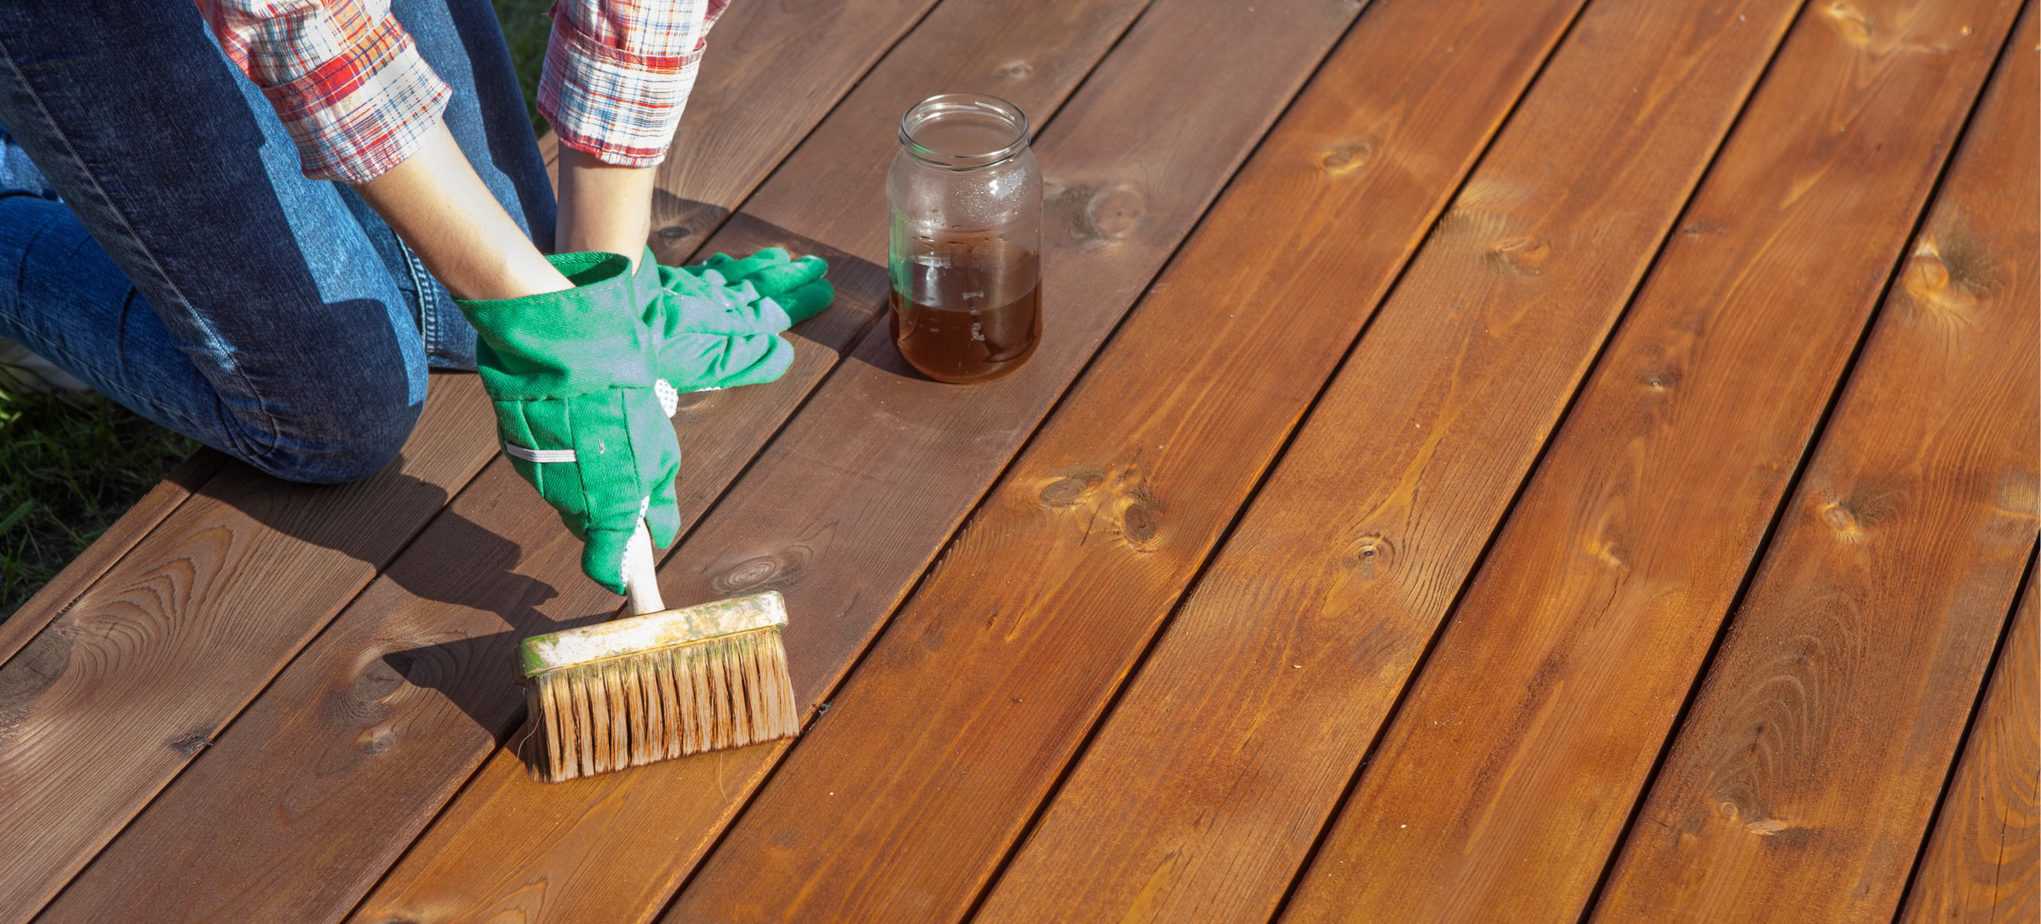 One way to keep your decking well maintained and looking new is by applying decking oil. In our step by step guide, we explain how to apply decking oil properly